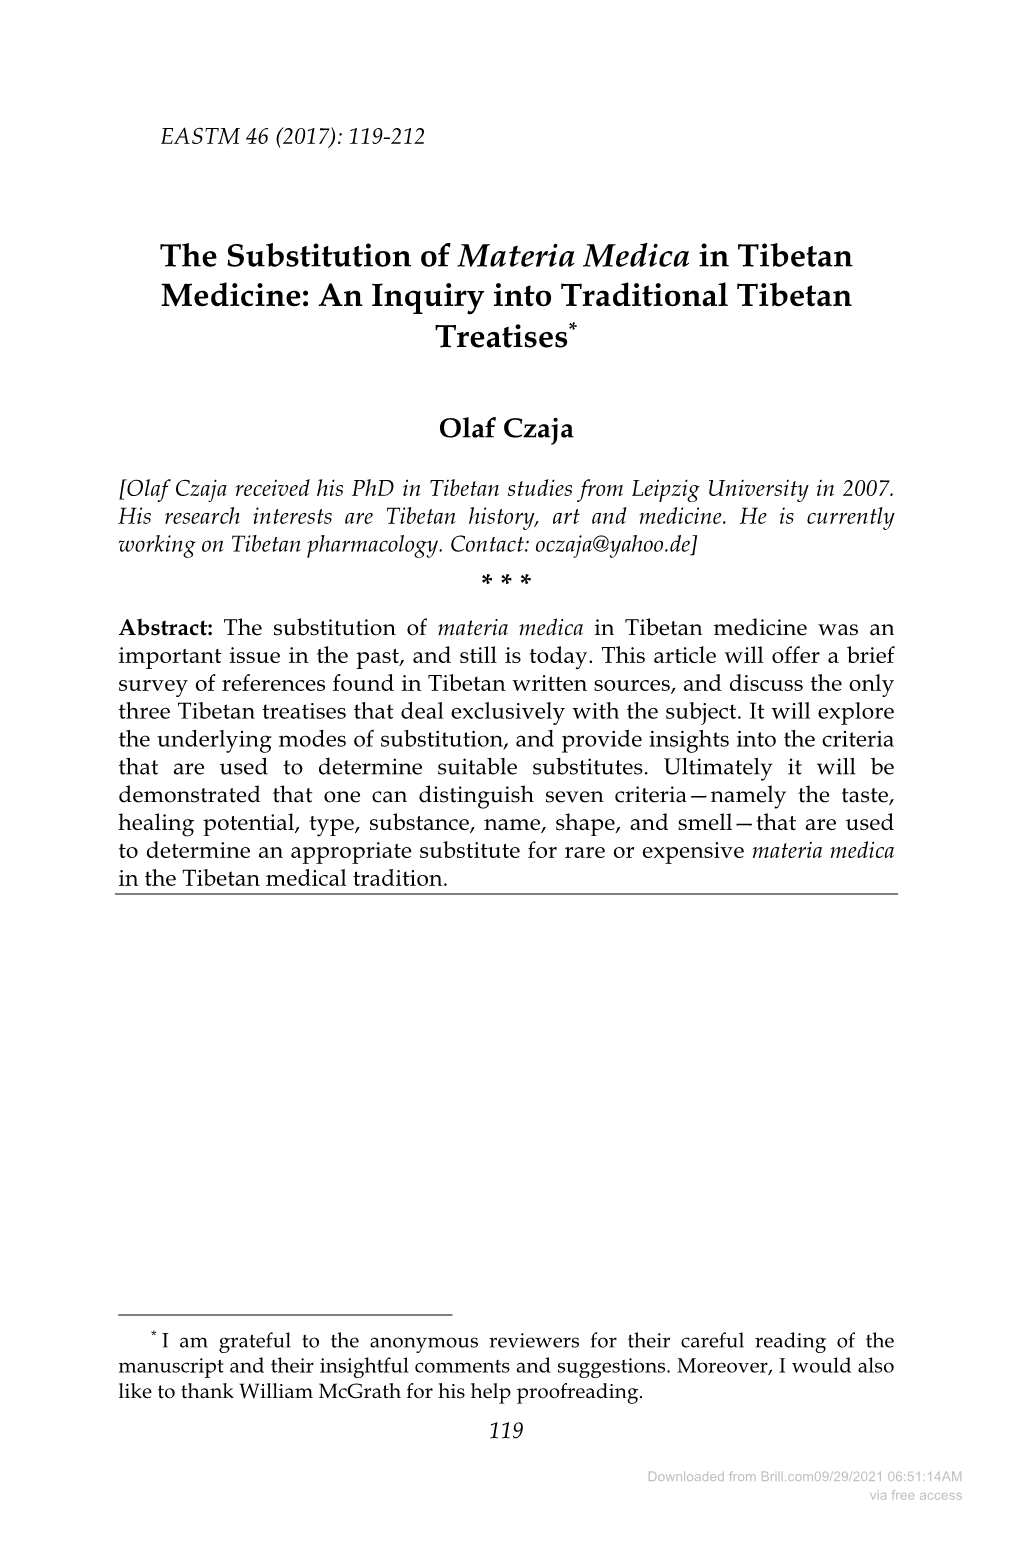 The Substitution of Materia Medica in Tibetan Medicine: an Inquiry Into Traditional Tibetan Treatises*